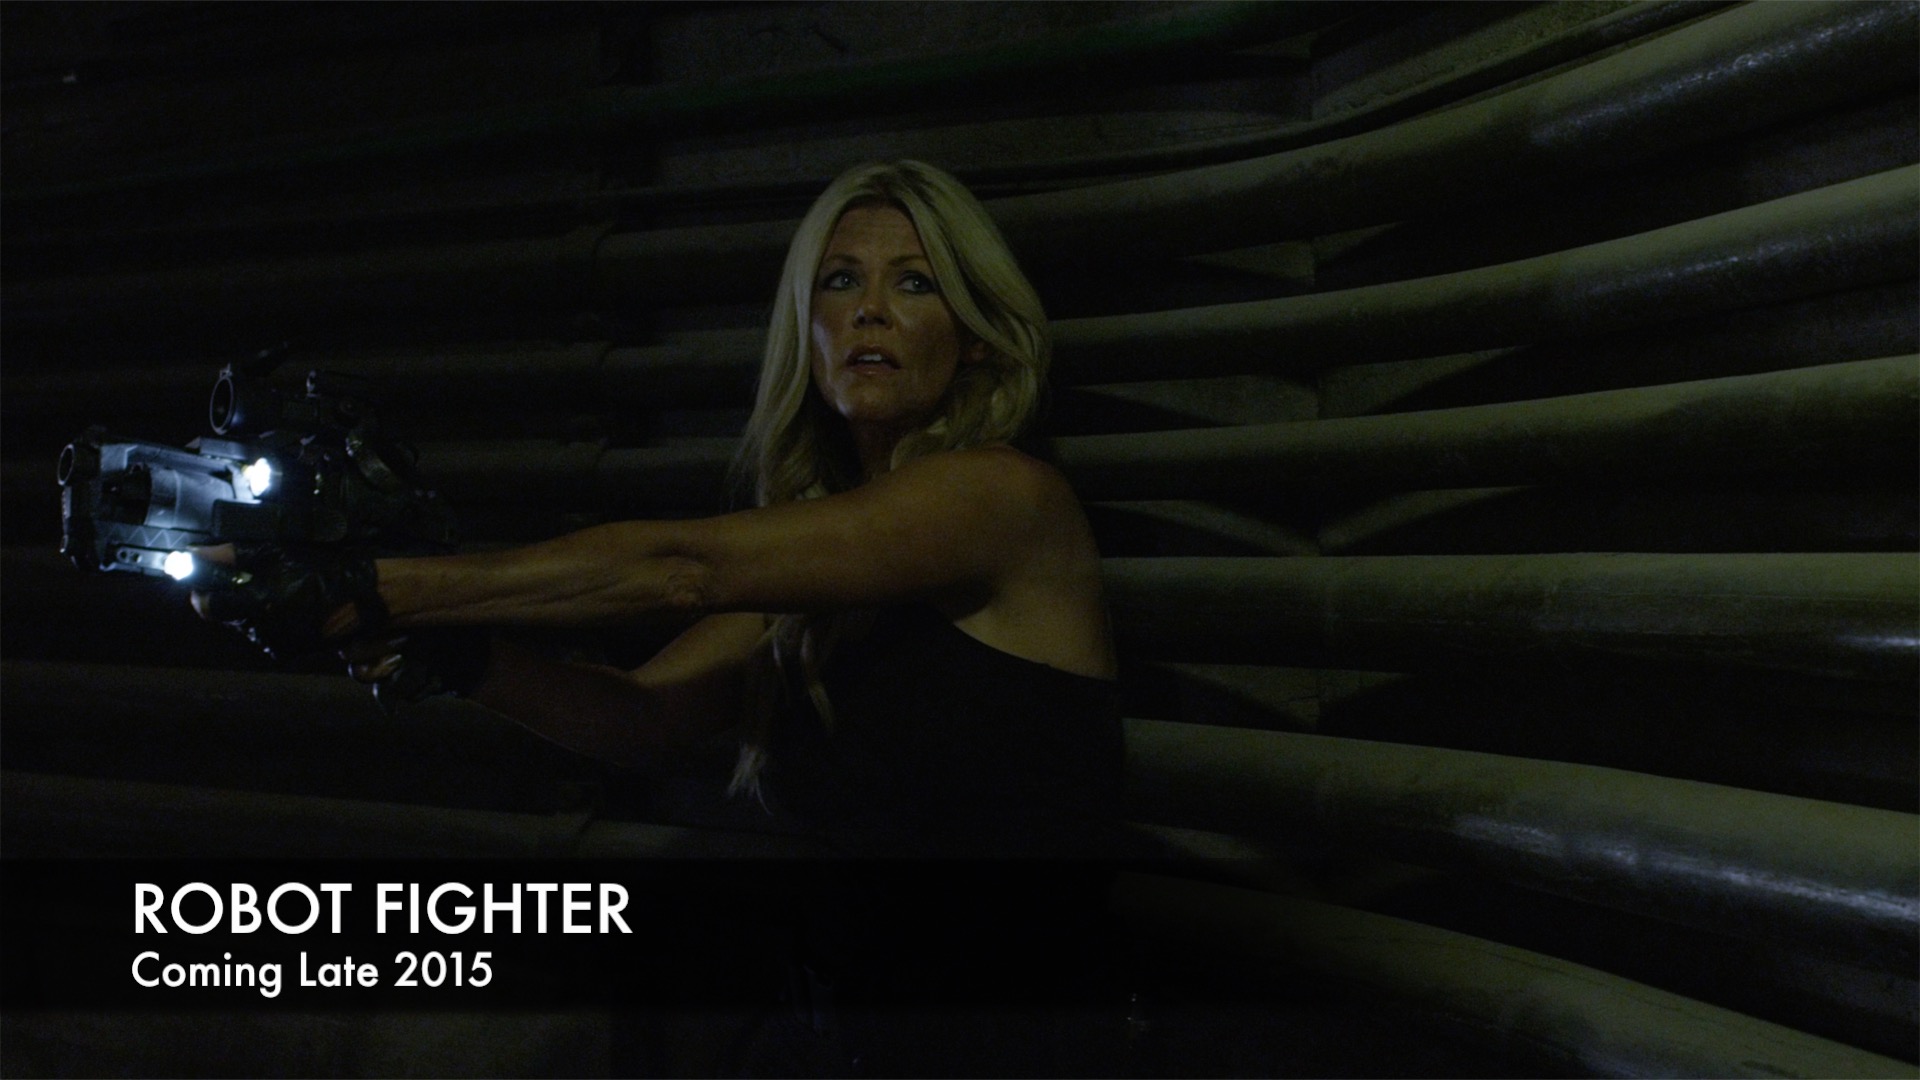 Tracey Birdsall in the upcoming feature film 